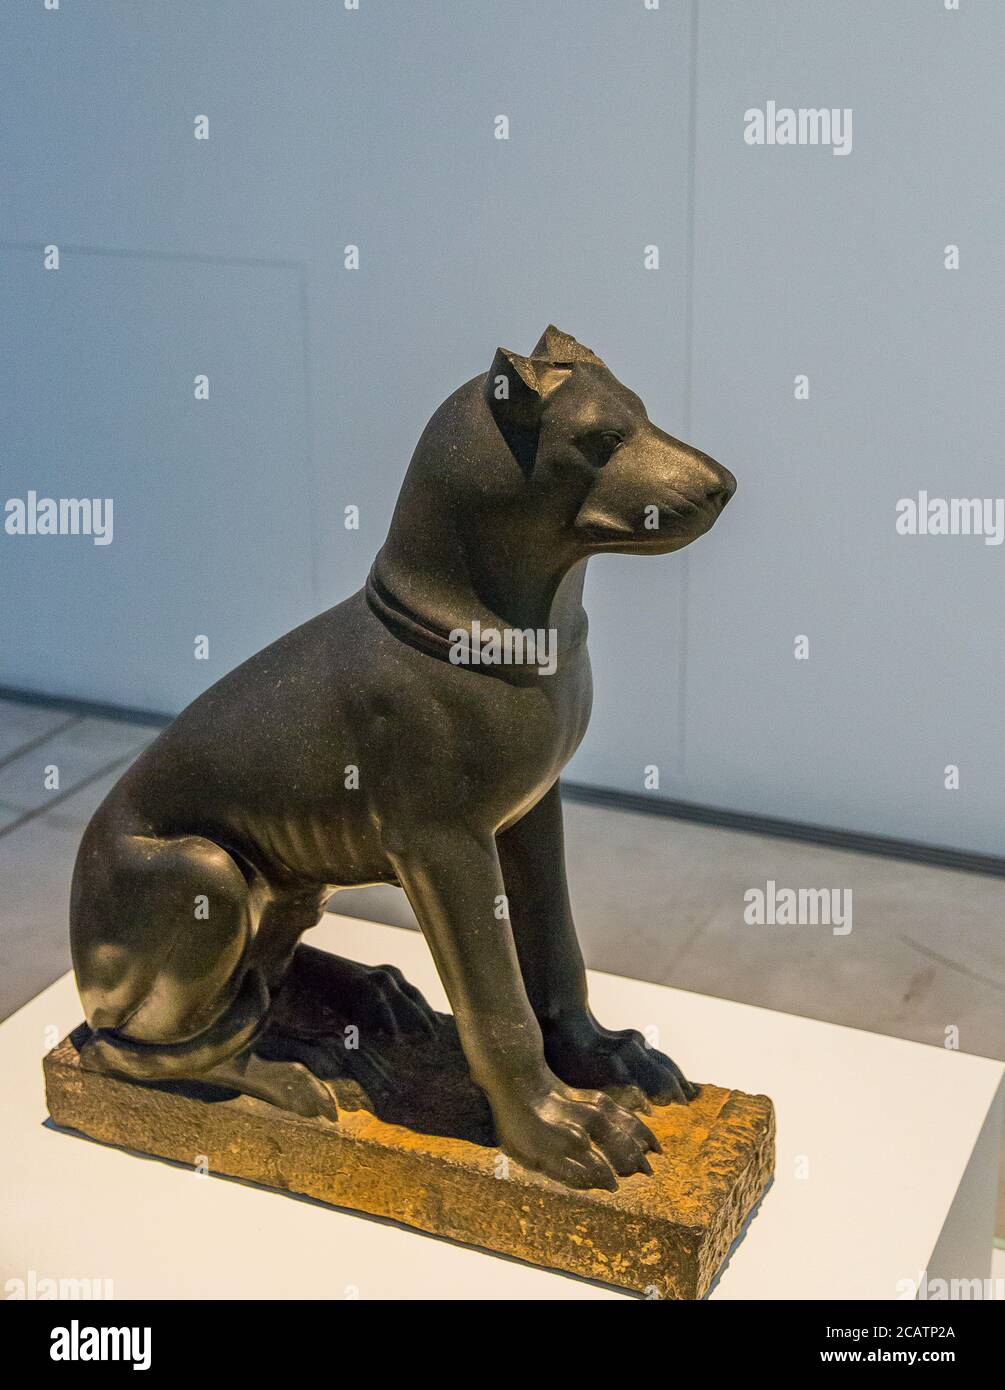 Exhibition 'The animal kingdom in Ancient Egypt', organized in 2015 by the Louvre Museum in Lens. Dog statue of an unusual style. Stock Photo